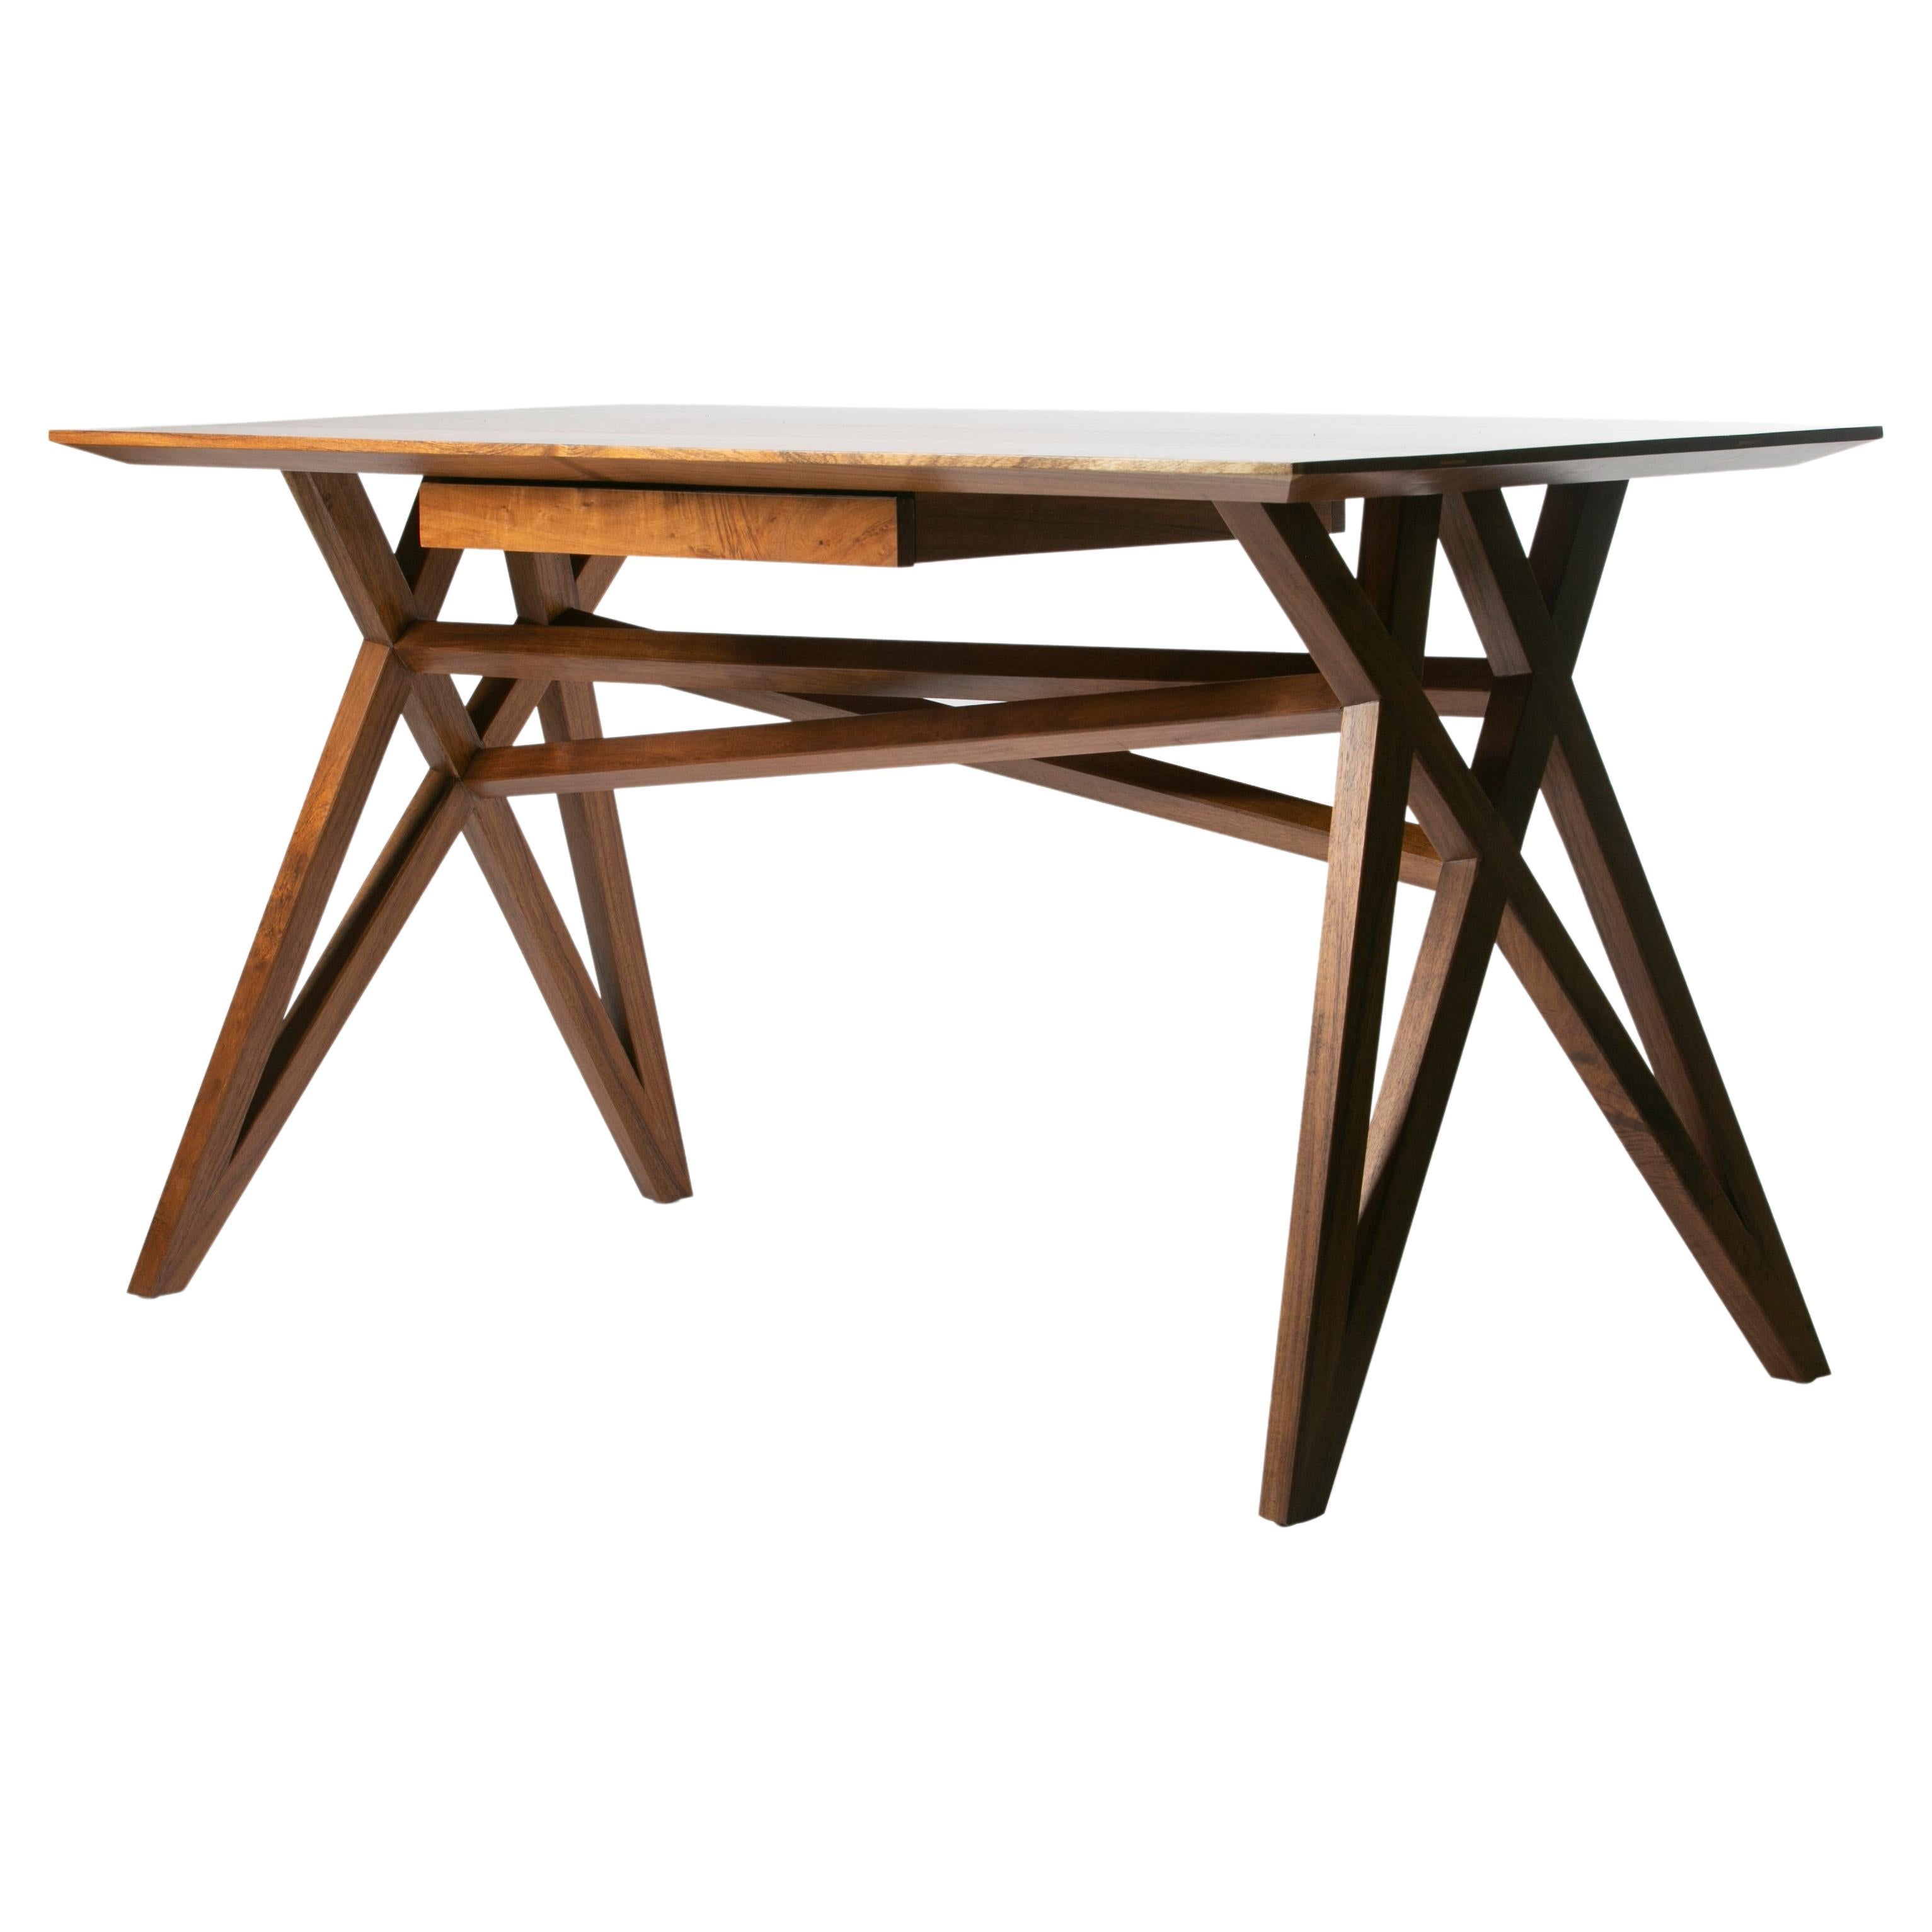 Mixquic 140 Tropical Hardwood Desk, Contemporary Mexican Design For Sale